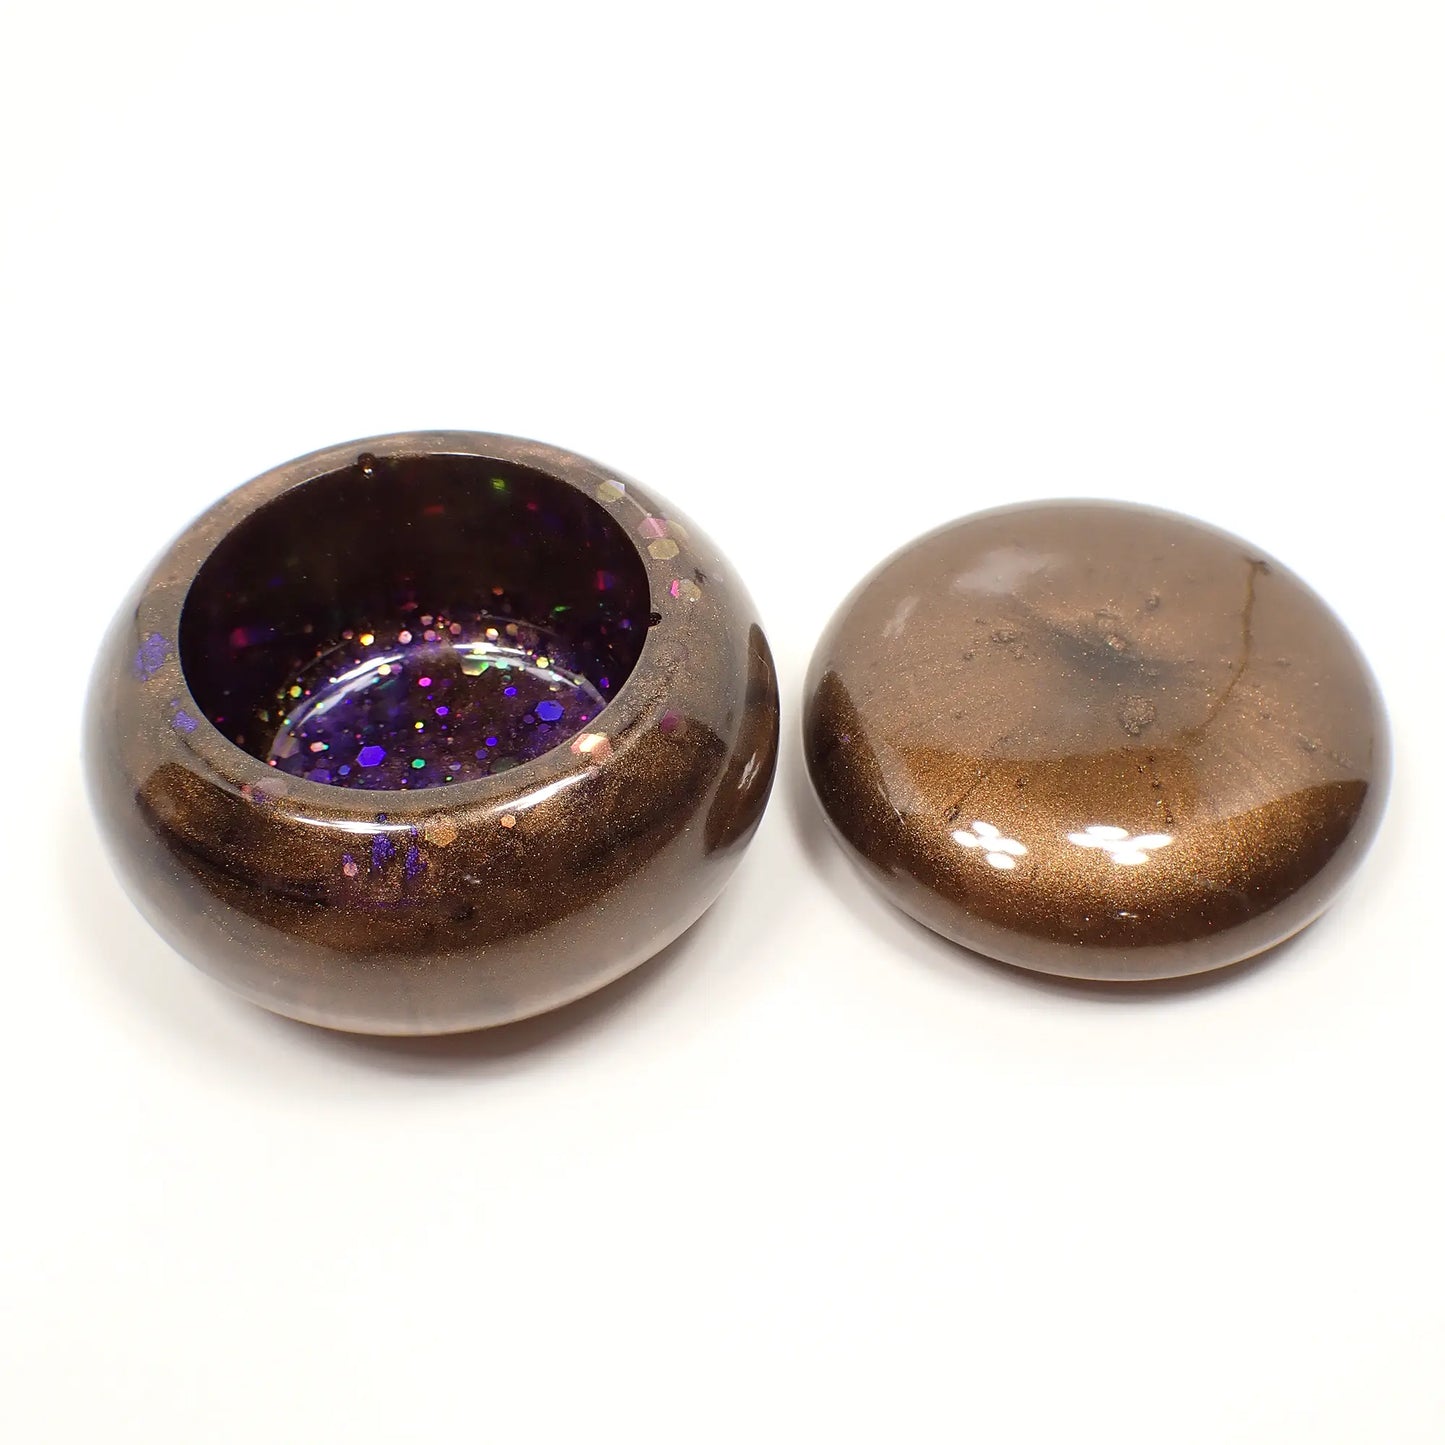 Small Pearly Brown Blue and Purple Resin Handmade Round Trinket Box with Iridescent Purple Glitter